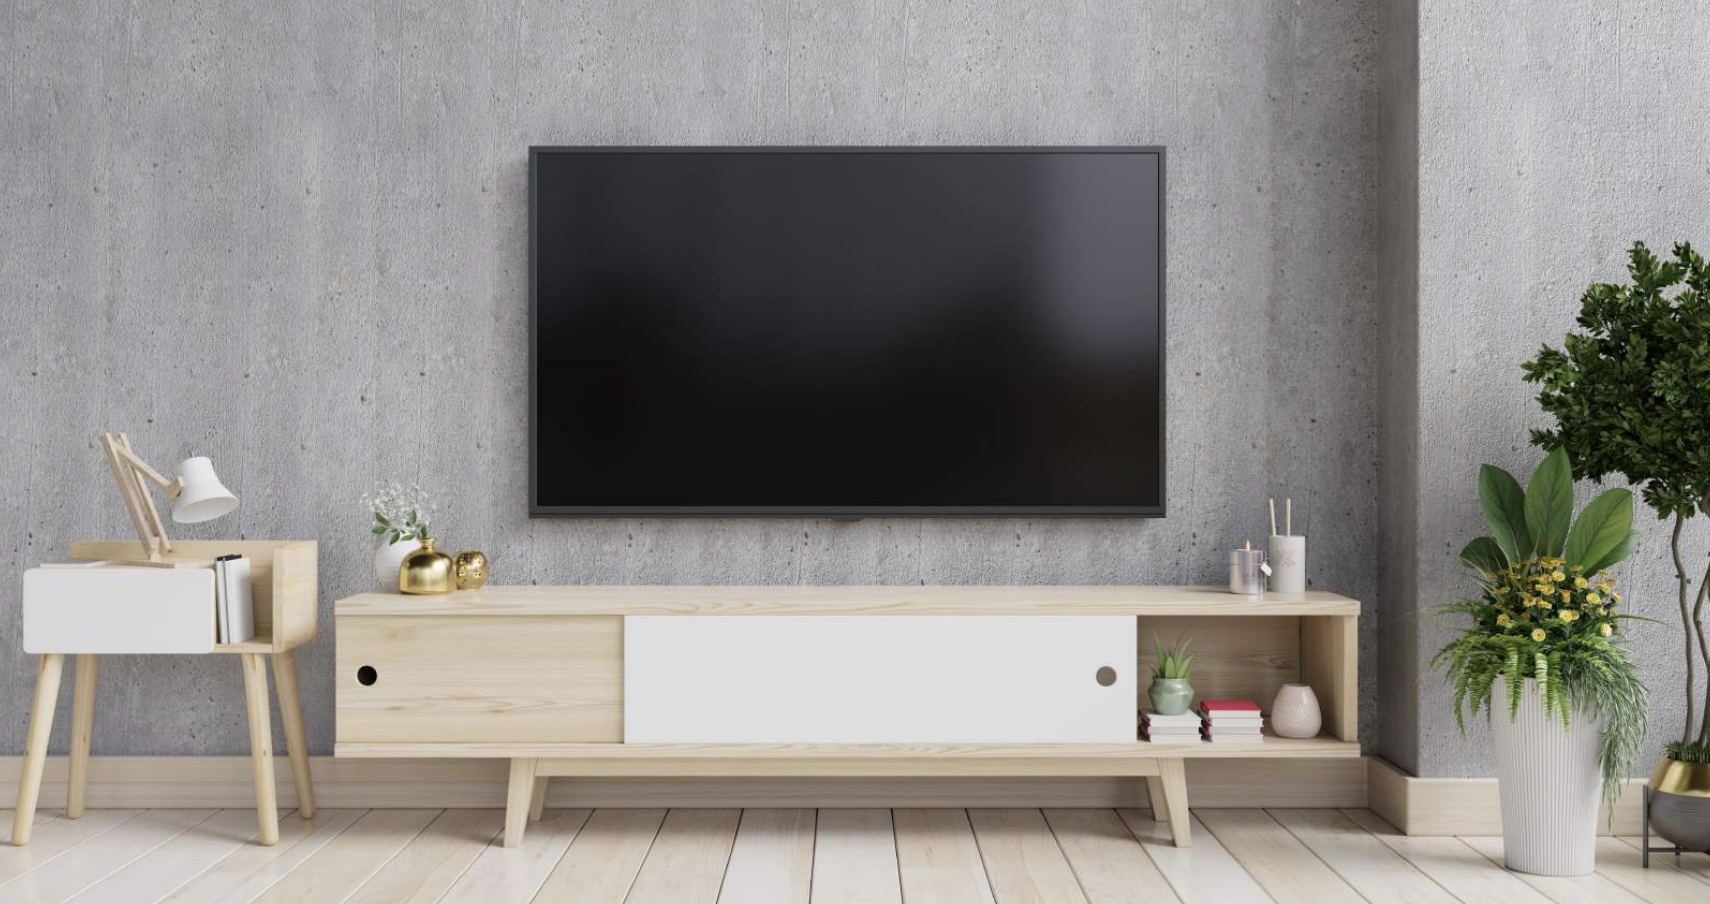 Low-Budget Creative Ways You Can Mount Your Tv In Hdb